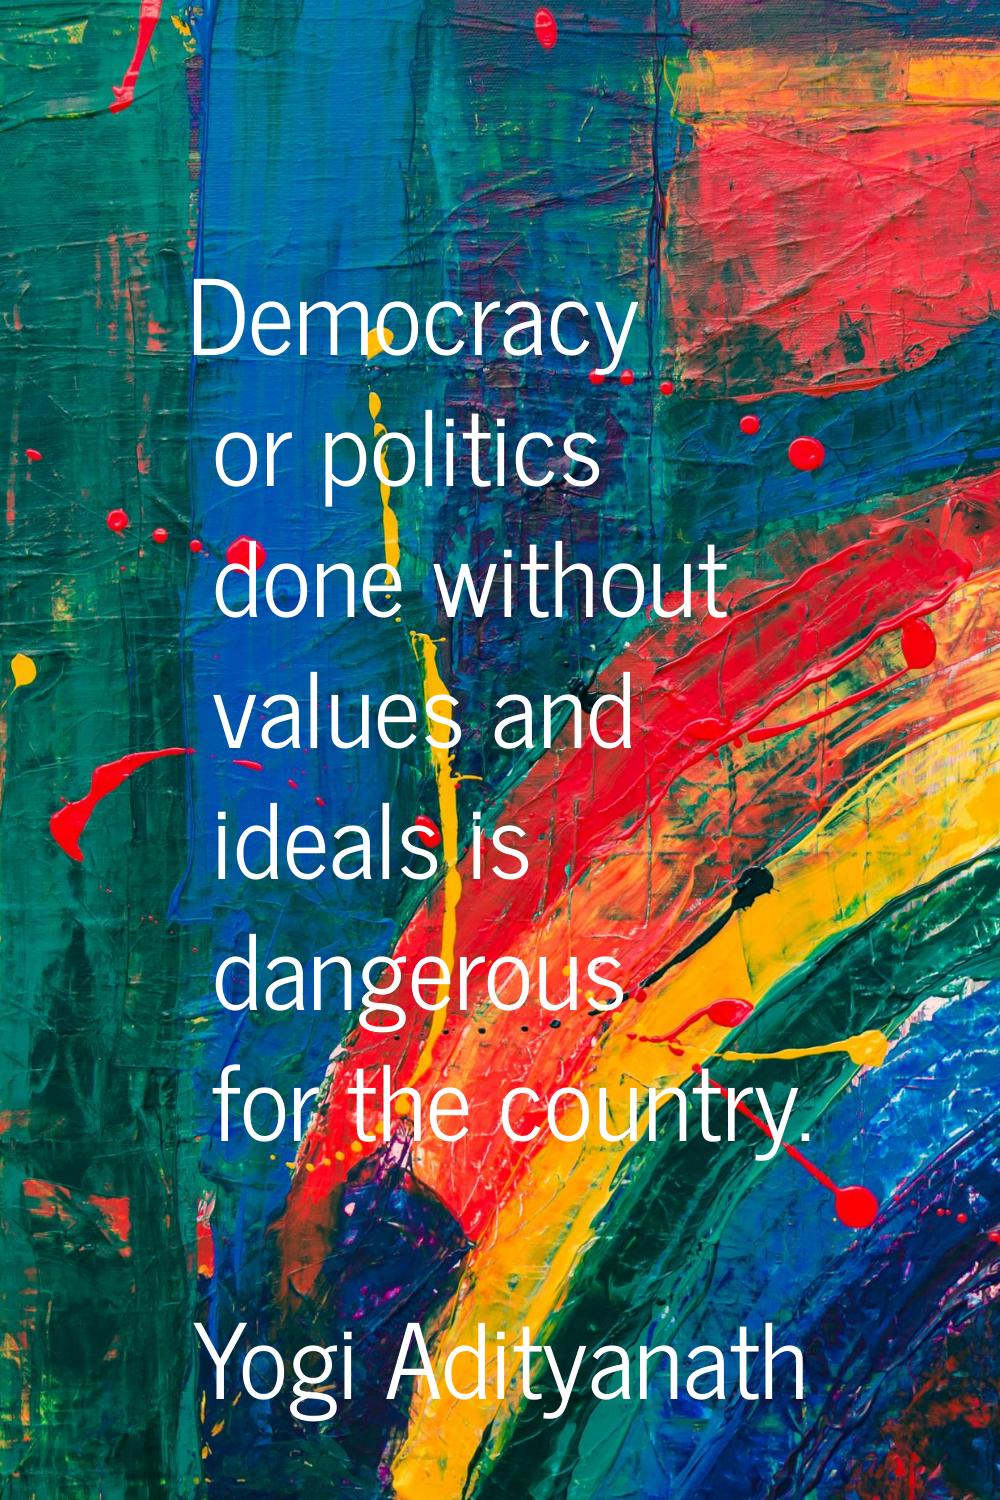 Democracy or politics done without values and ideals is dangerous for the country.